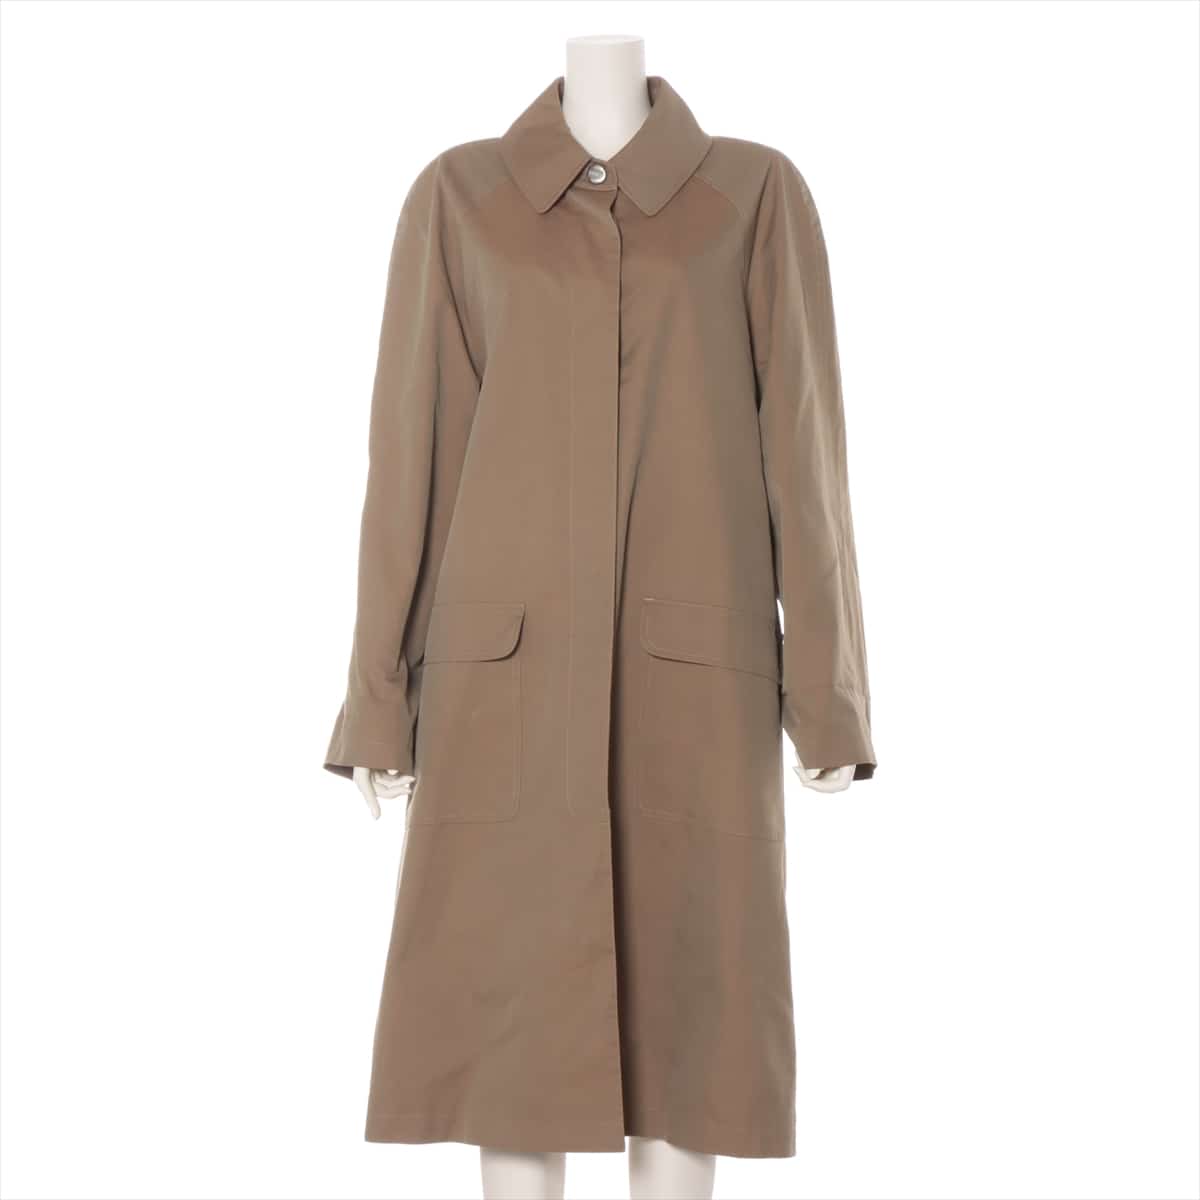 Chanel Coco Button Unknown material coats Unknown size Ladies' Beige No sign tag